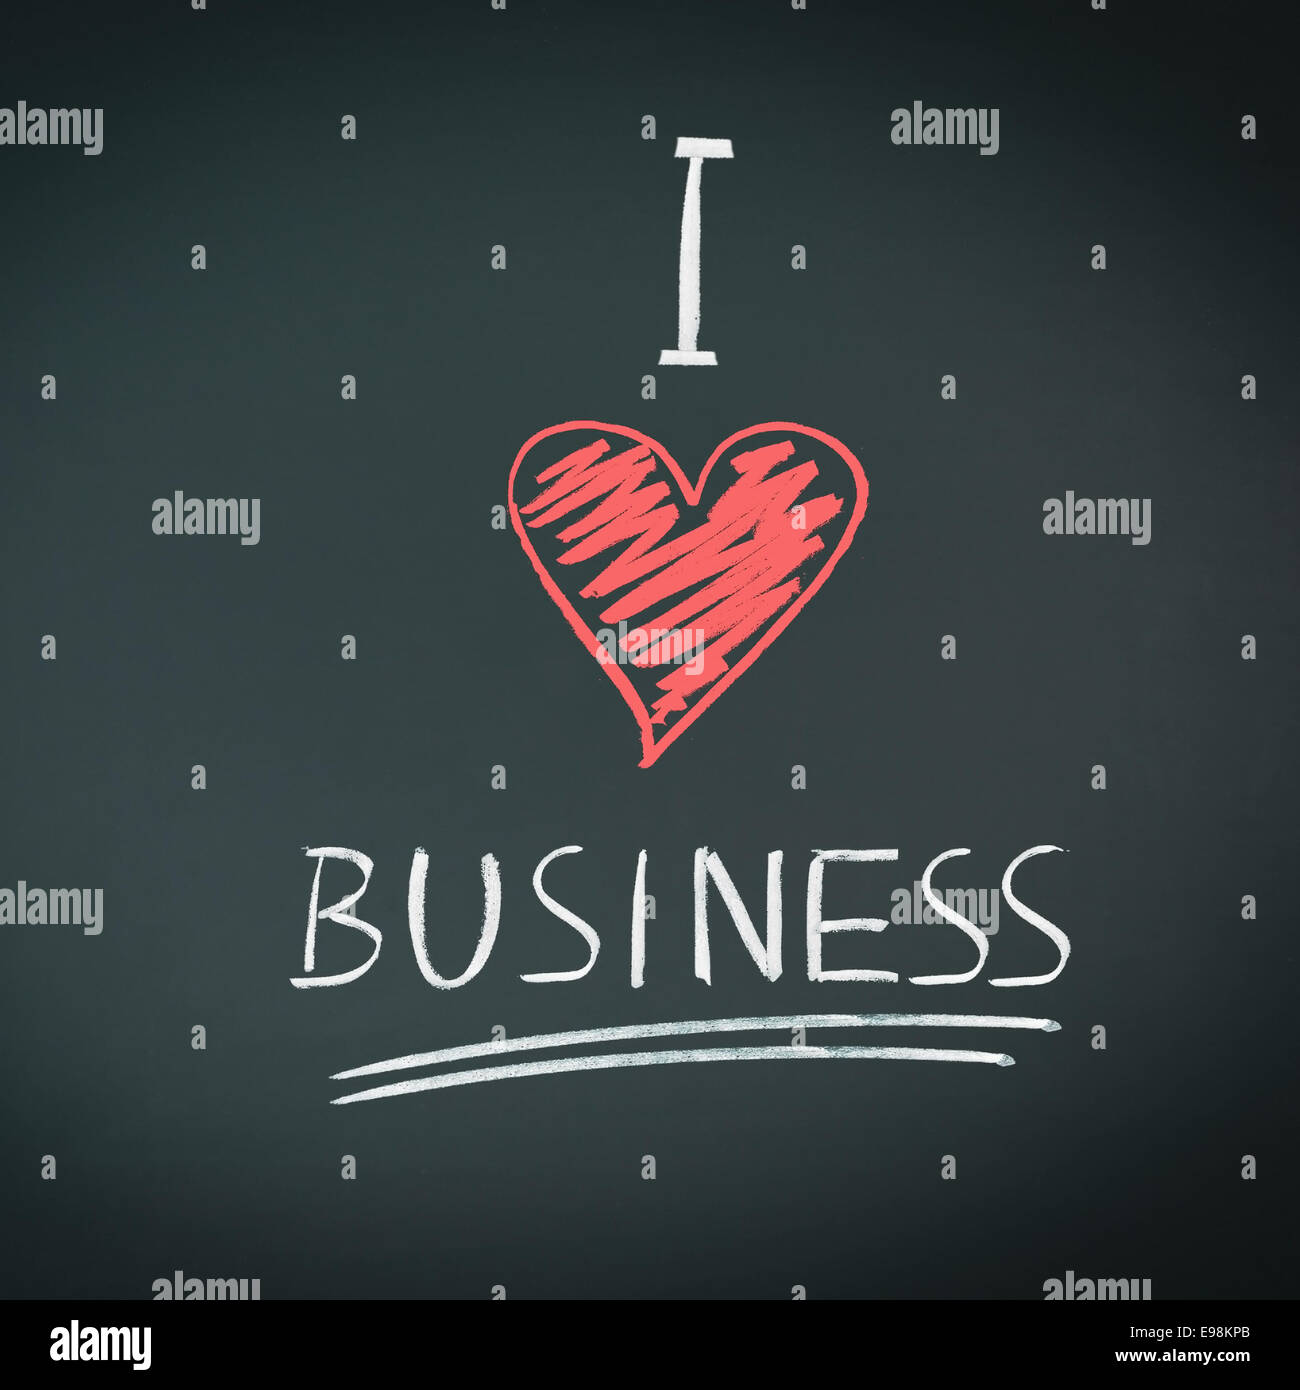 I Love Business. Handwritten message in chalk on a blackboard with a symbolic red heart for love. Stock Photo